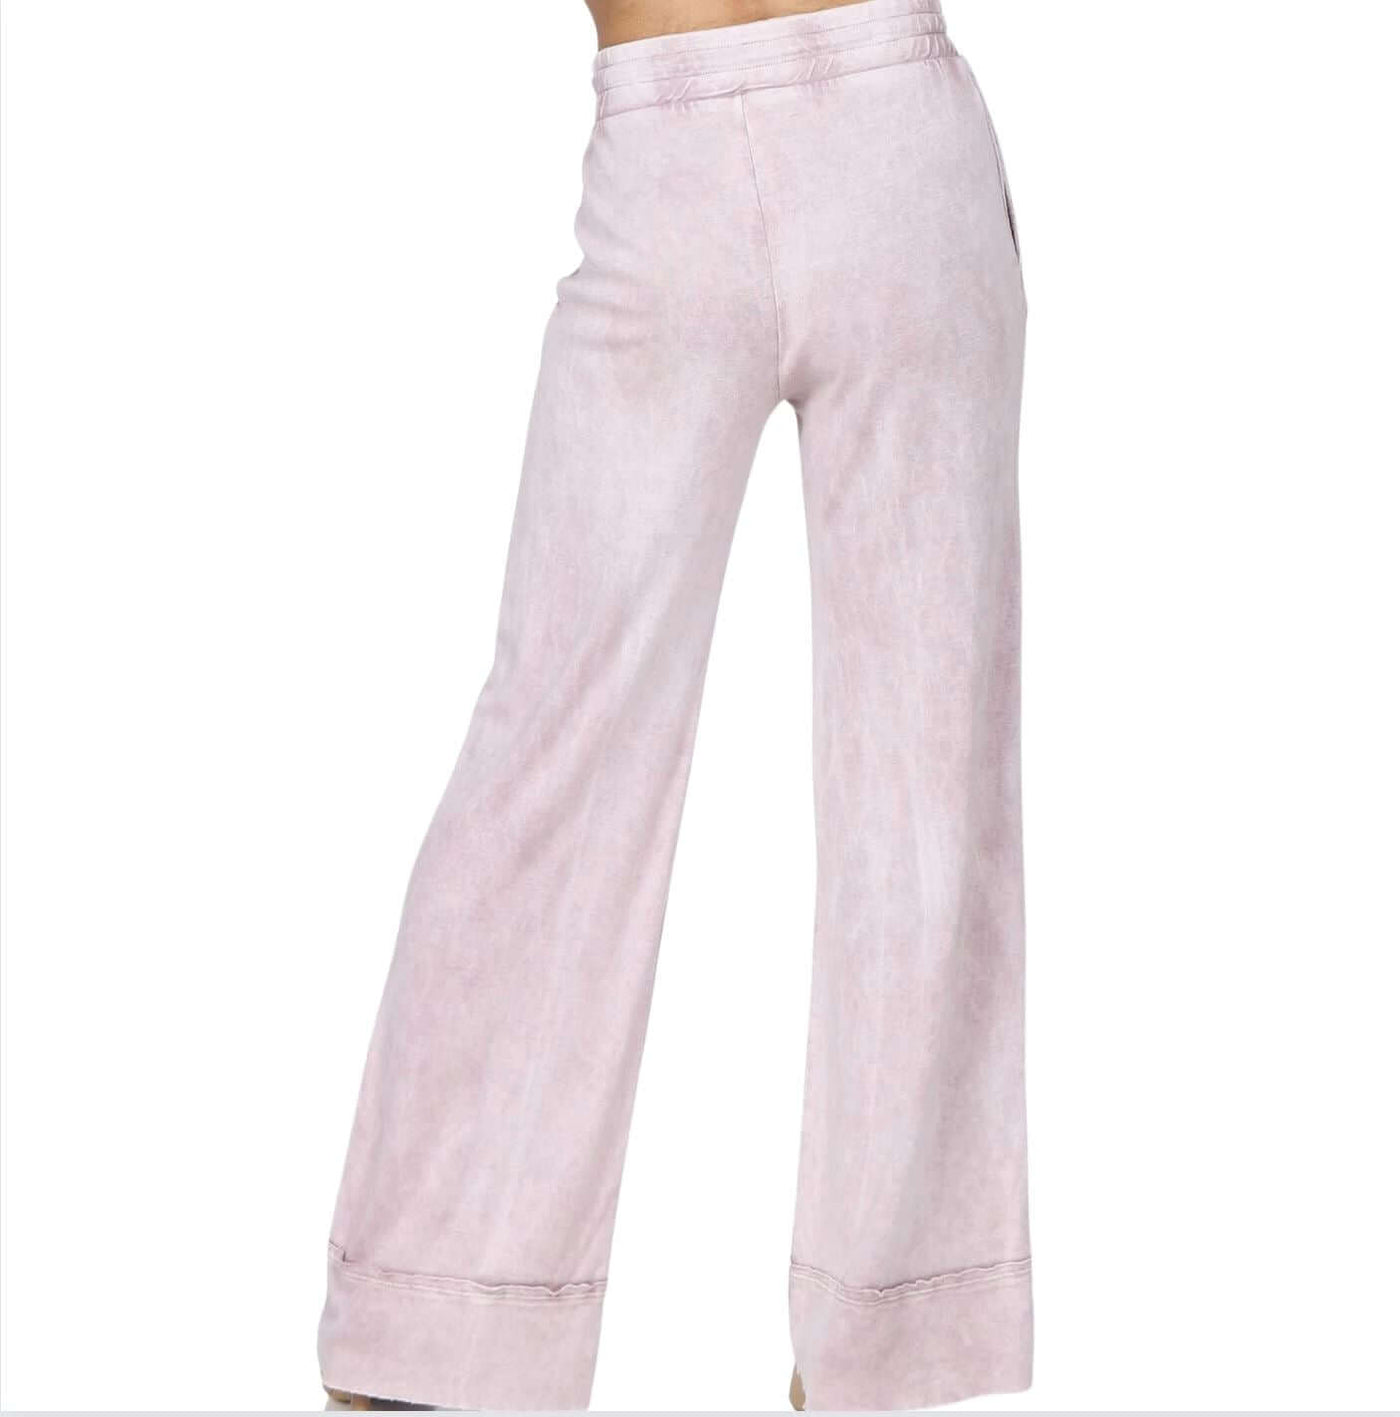 USA Made M. Rena Style# S4870 Ladies Mineral Washed Wide Leg Flare Bottom Raw Edge Loungewear Pants | Cotton & Modal Soft Fabric | Clothing Made in America | Color: Misty Mauve